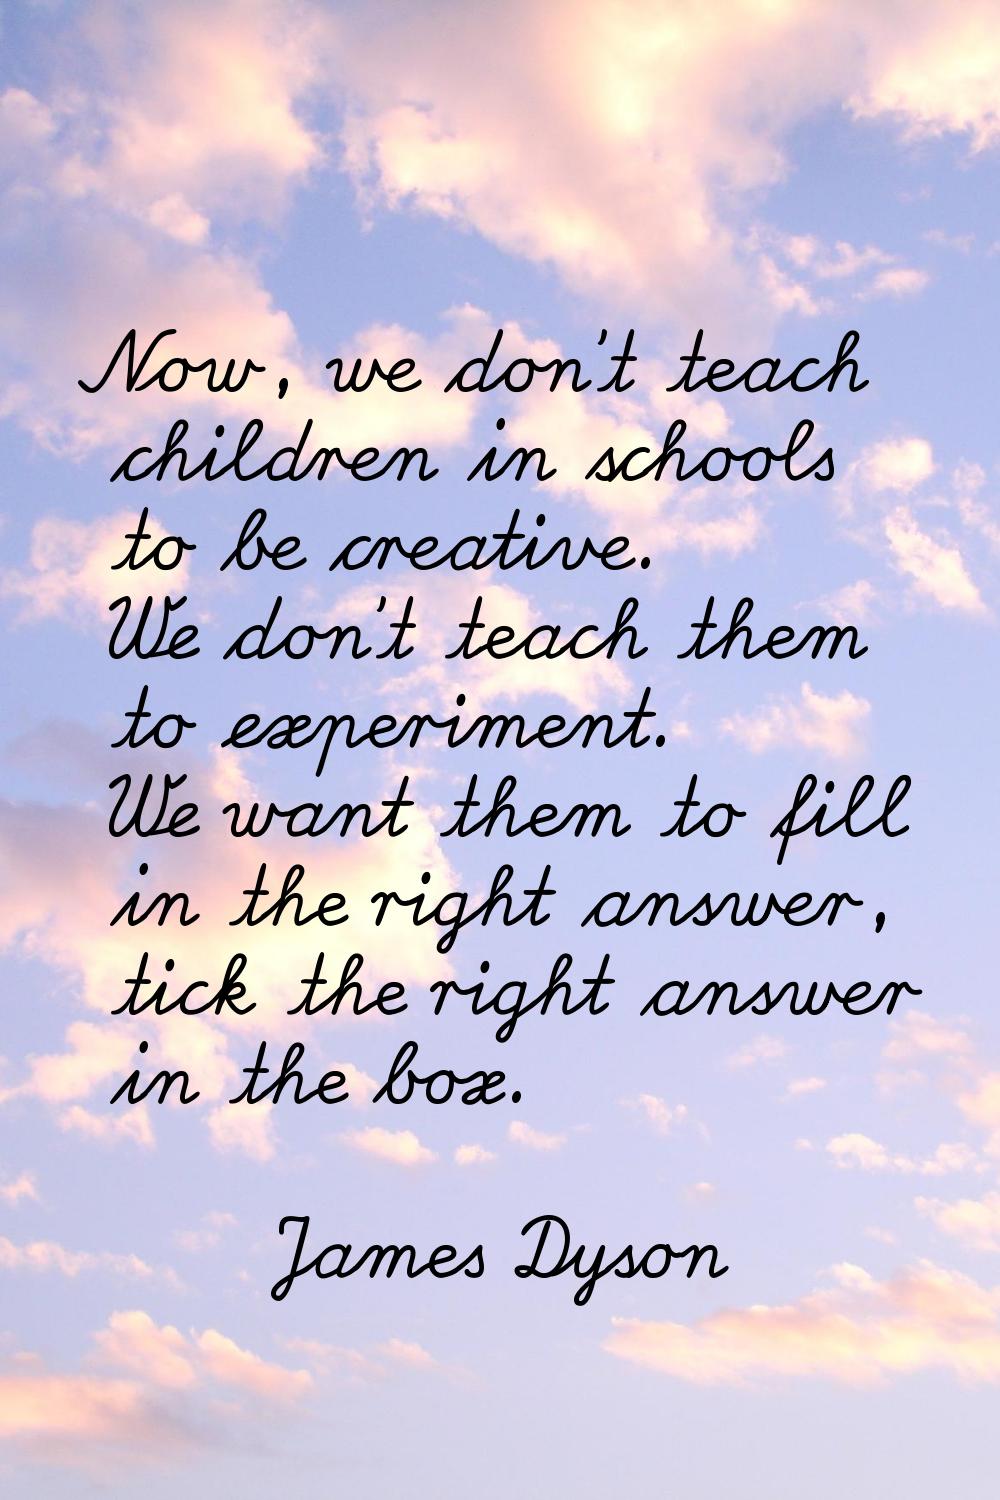 Now, we don't teach children in schools to be creative. We don't teach them to experiment. We want 